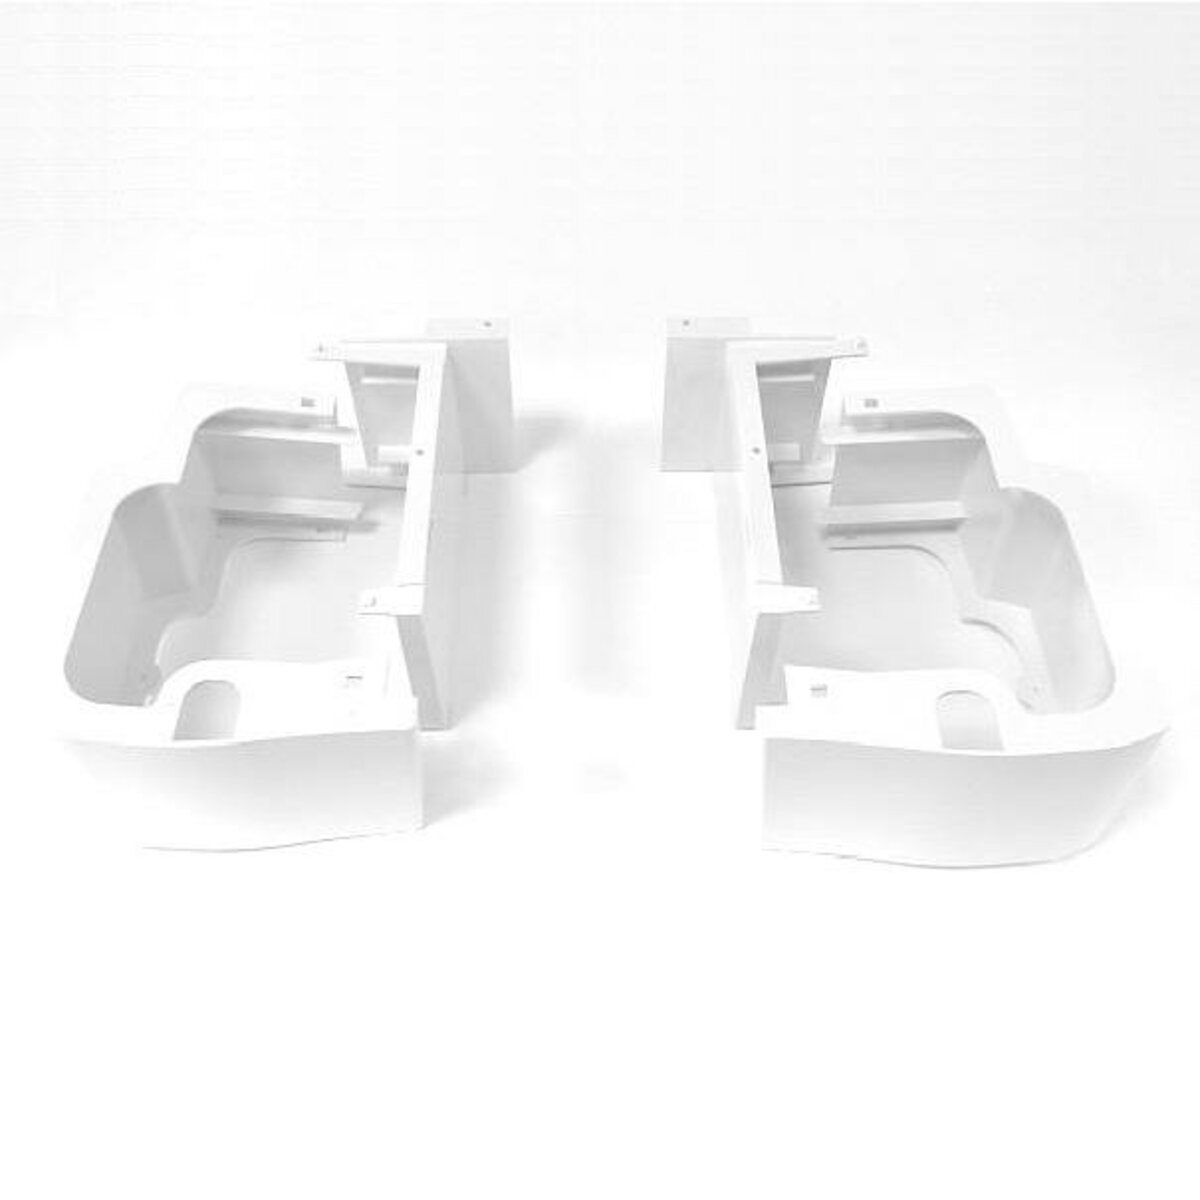 Pad feet for floor support for the charisma crc 8-9 fan coil with Sabiana cabinet